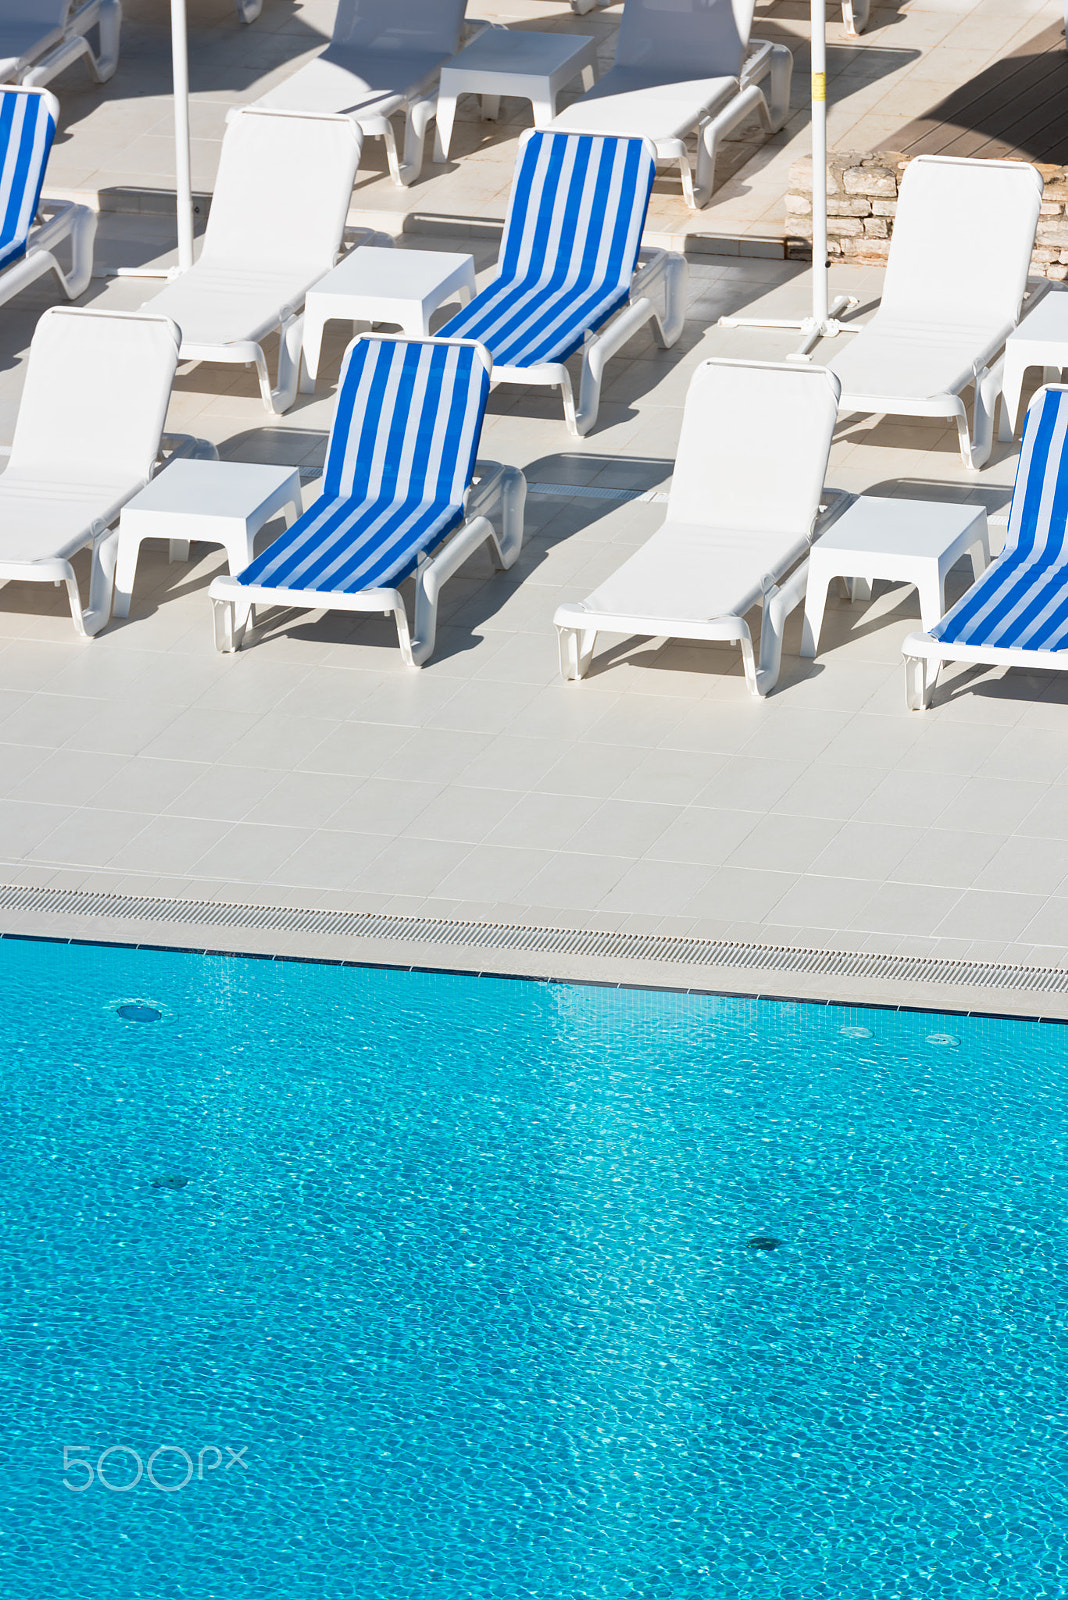 Nikon D810 sample photo. Hotel poolside chairs near a swimming pool photography